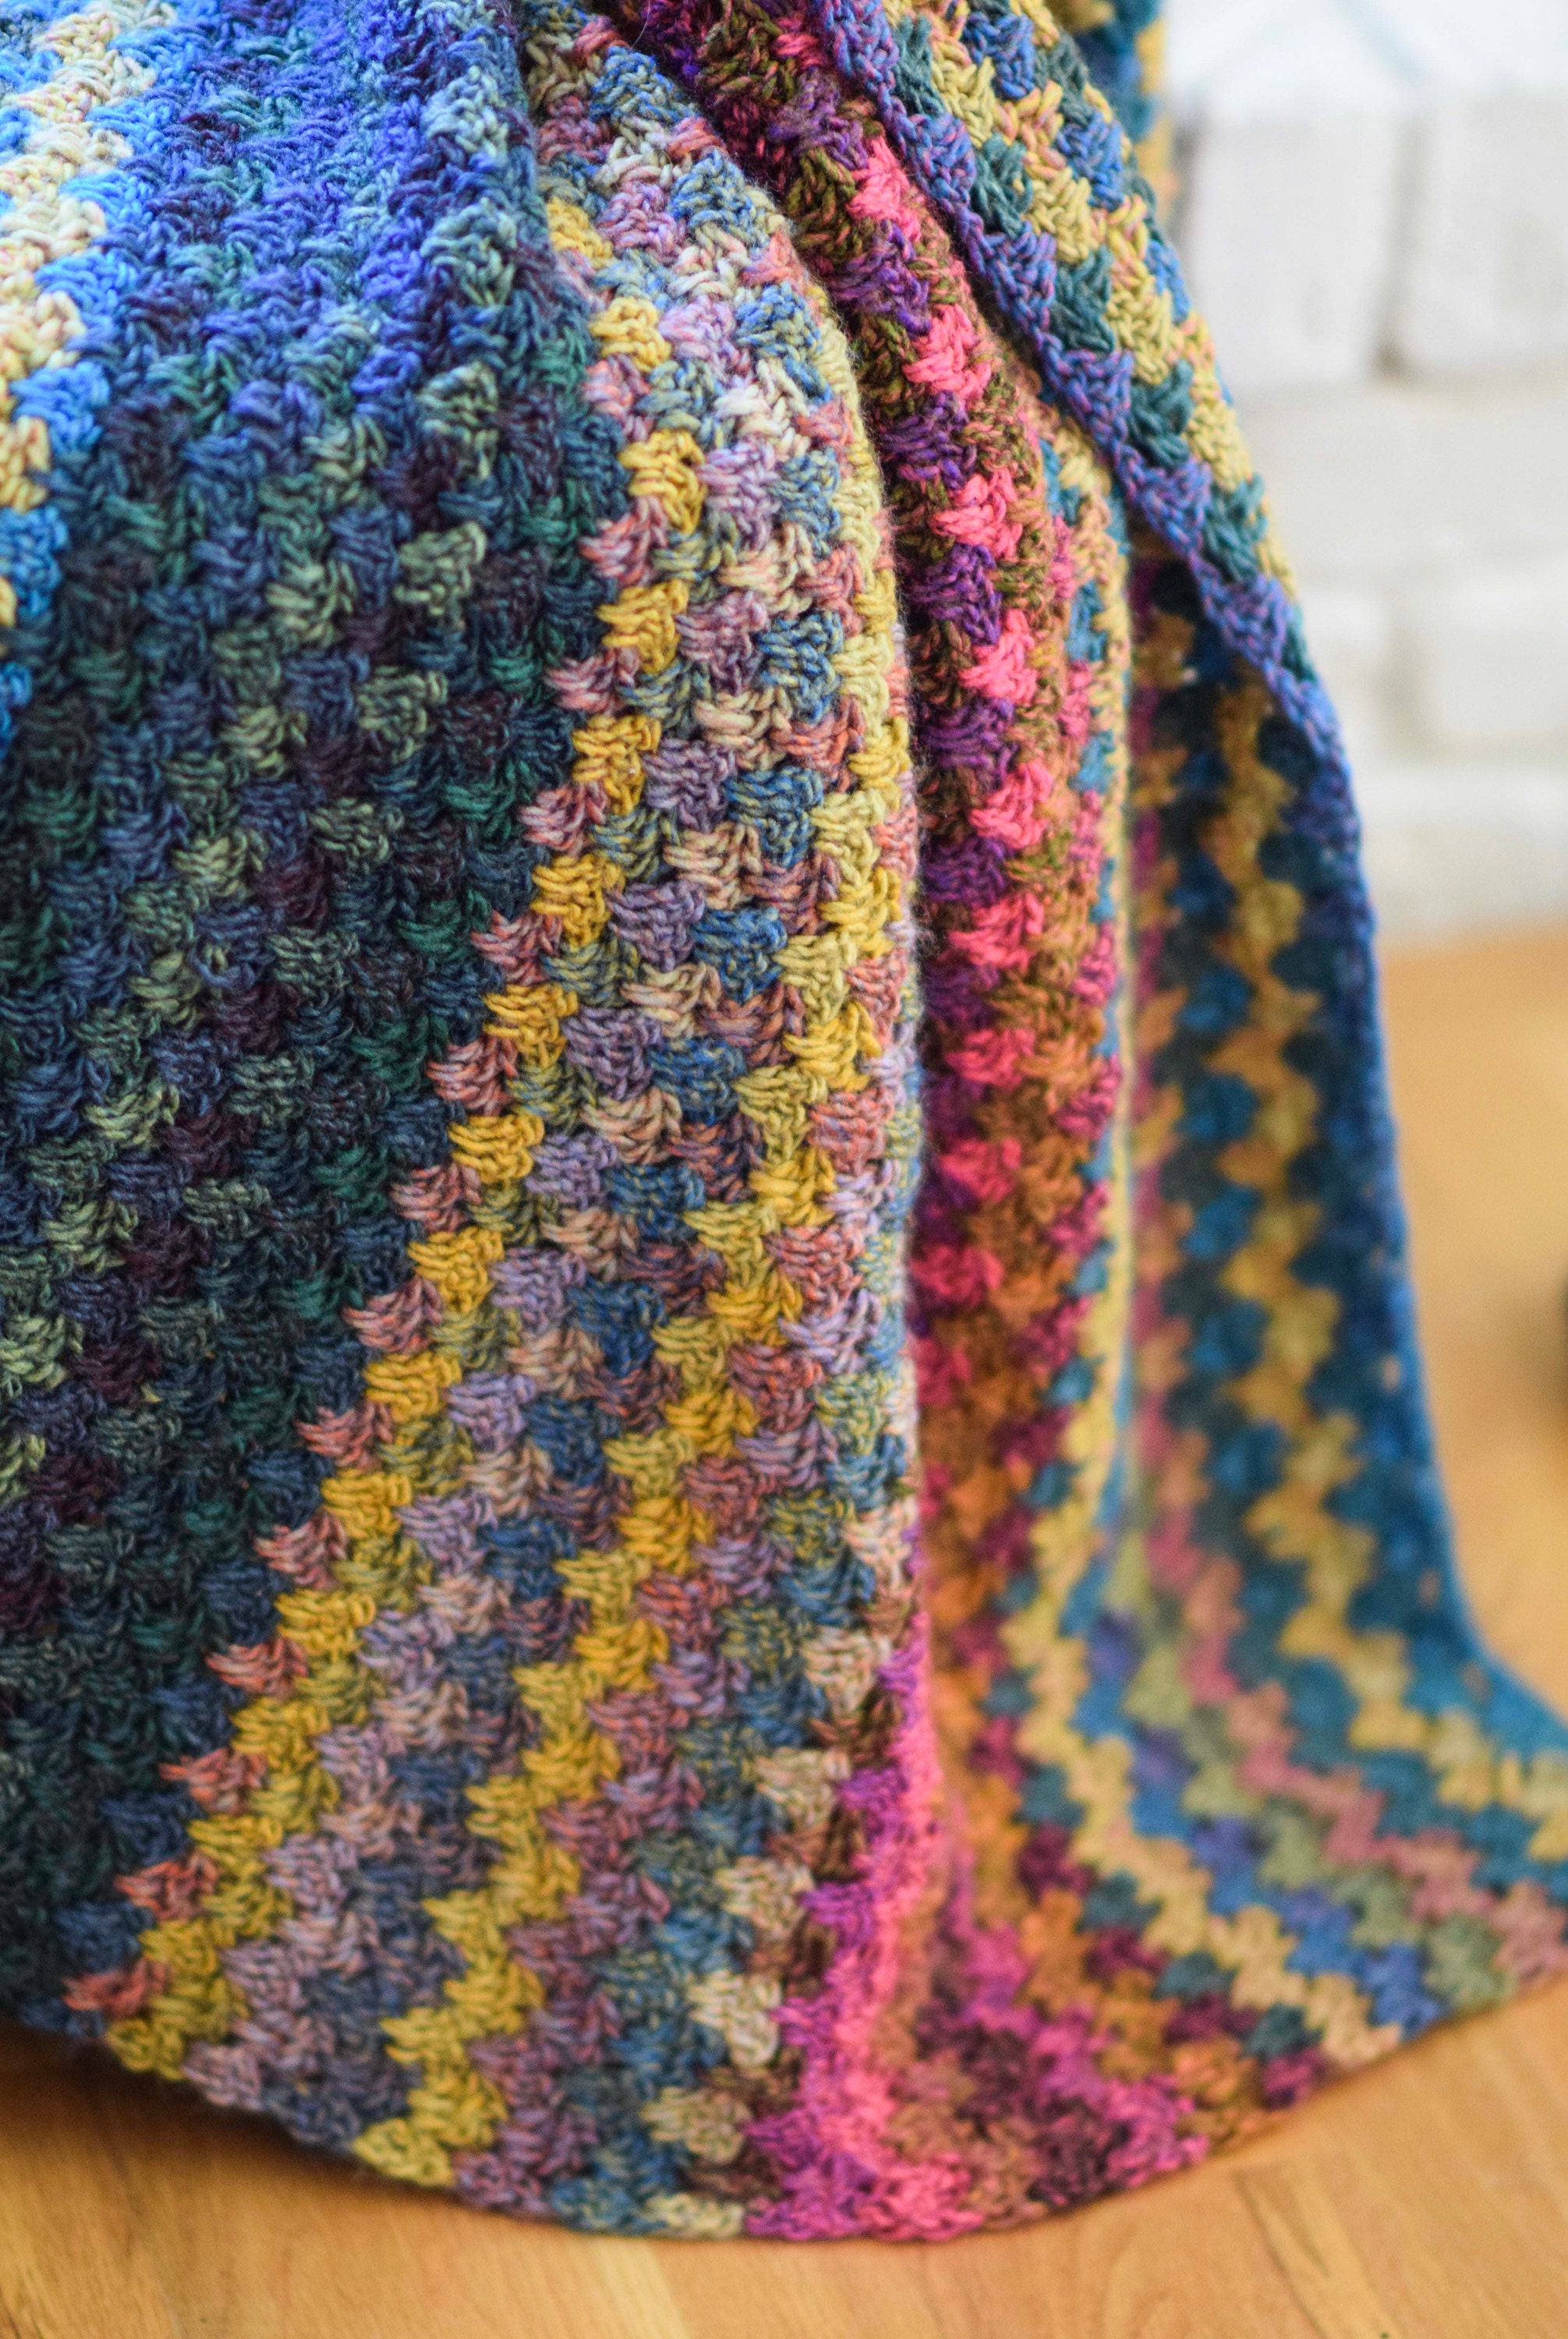 Top 15 Free Crochet Patterns To Make With Bernat Blanket Yarn, by Avery  Smith